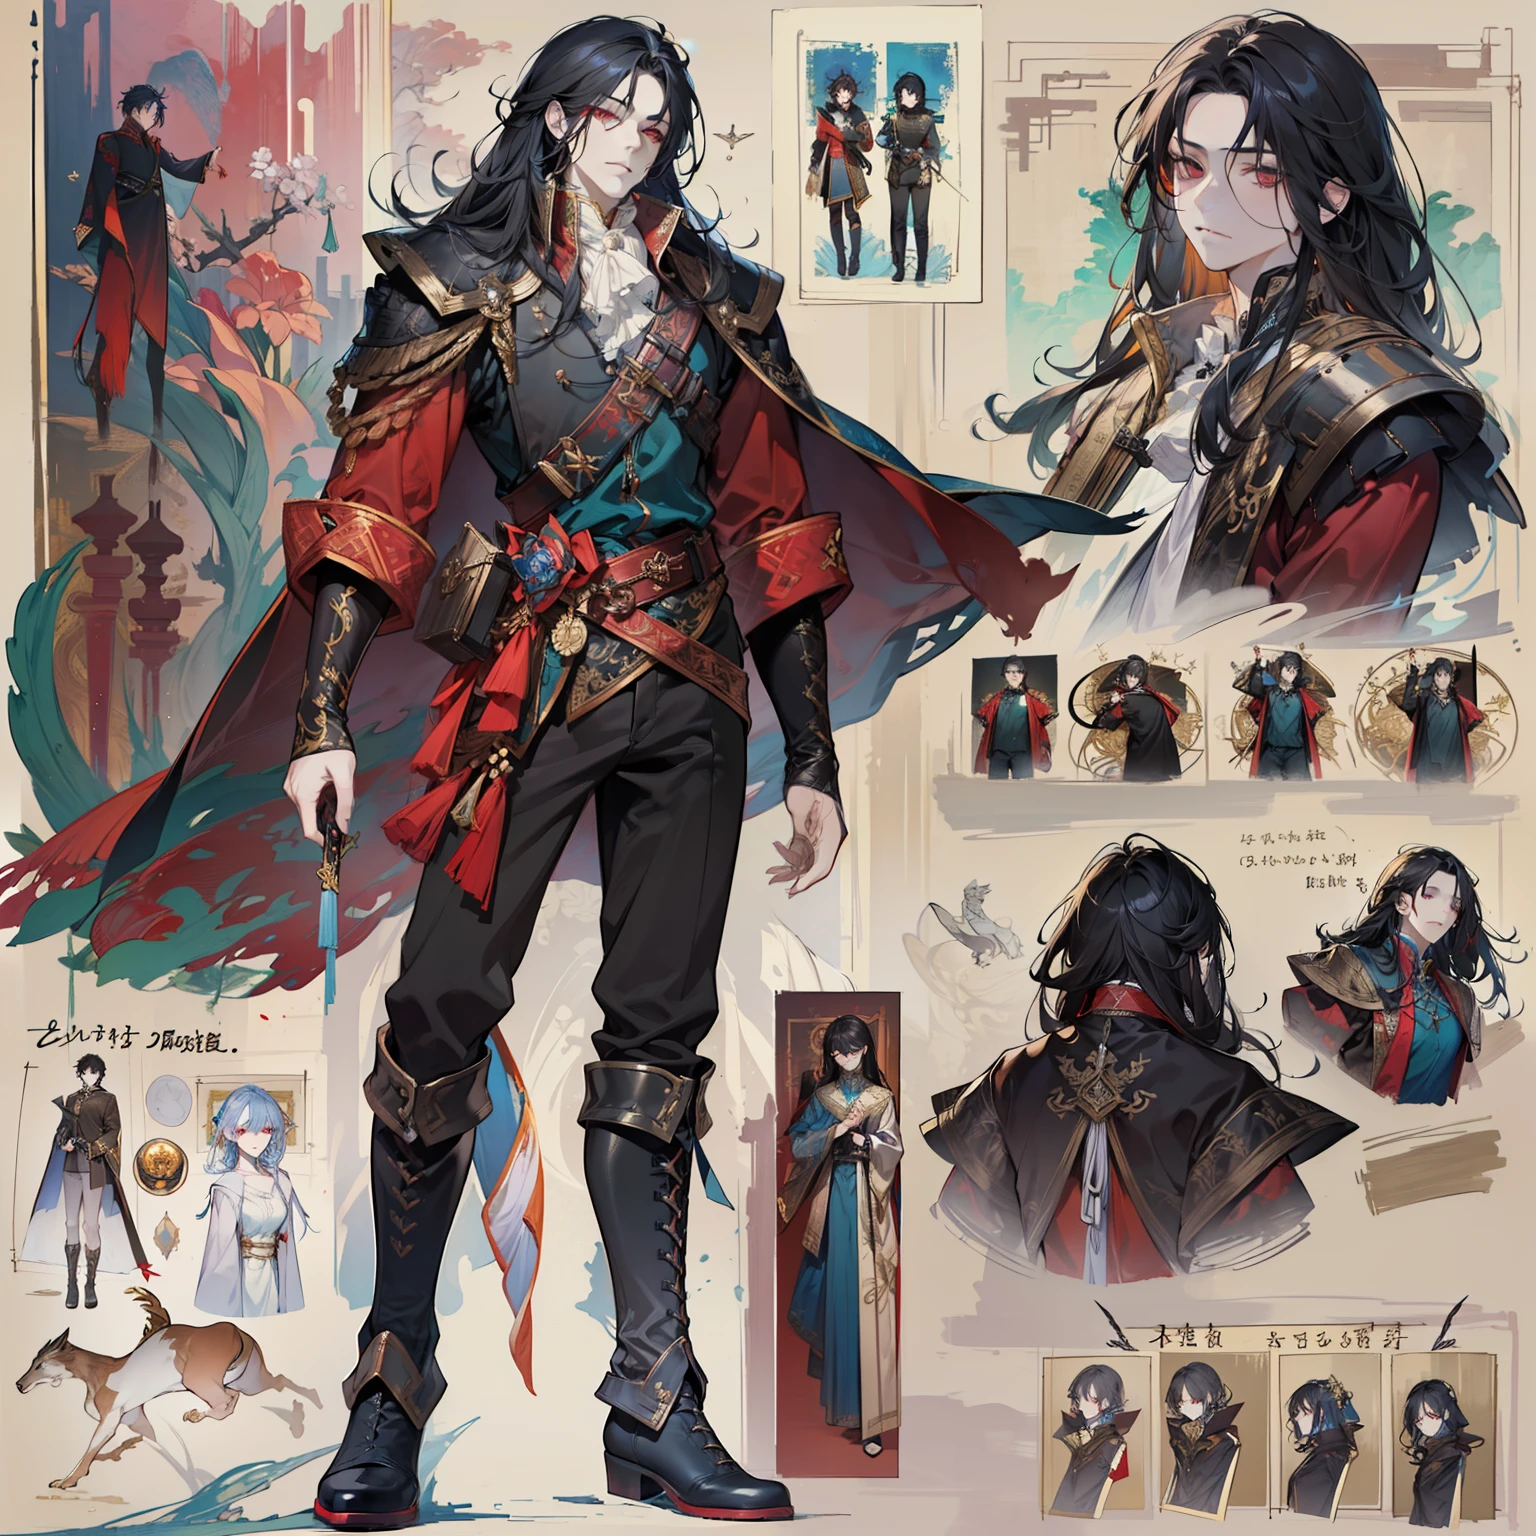 1 boy, solo, dark hair, black hair, long hair, red eyes, shirt, high boots, Lightweight clothing, medieval theme, looking at viewer, man, colorful magic wrap, HD, rich color, detail, light, masterpiece, masterpiece, fantasy art, beautiful painting, guwaika style, epic exquisite character art, stunning characters, strong man (reference sheet:1.5)